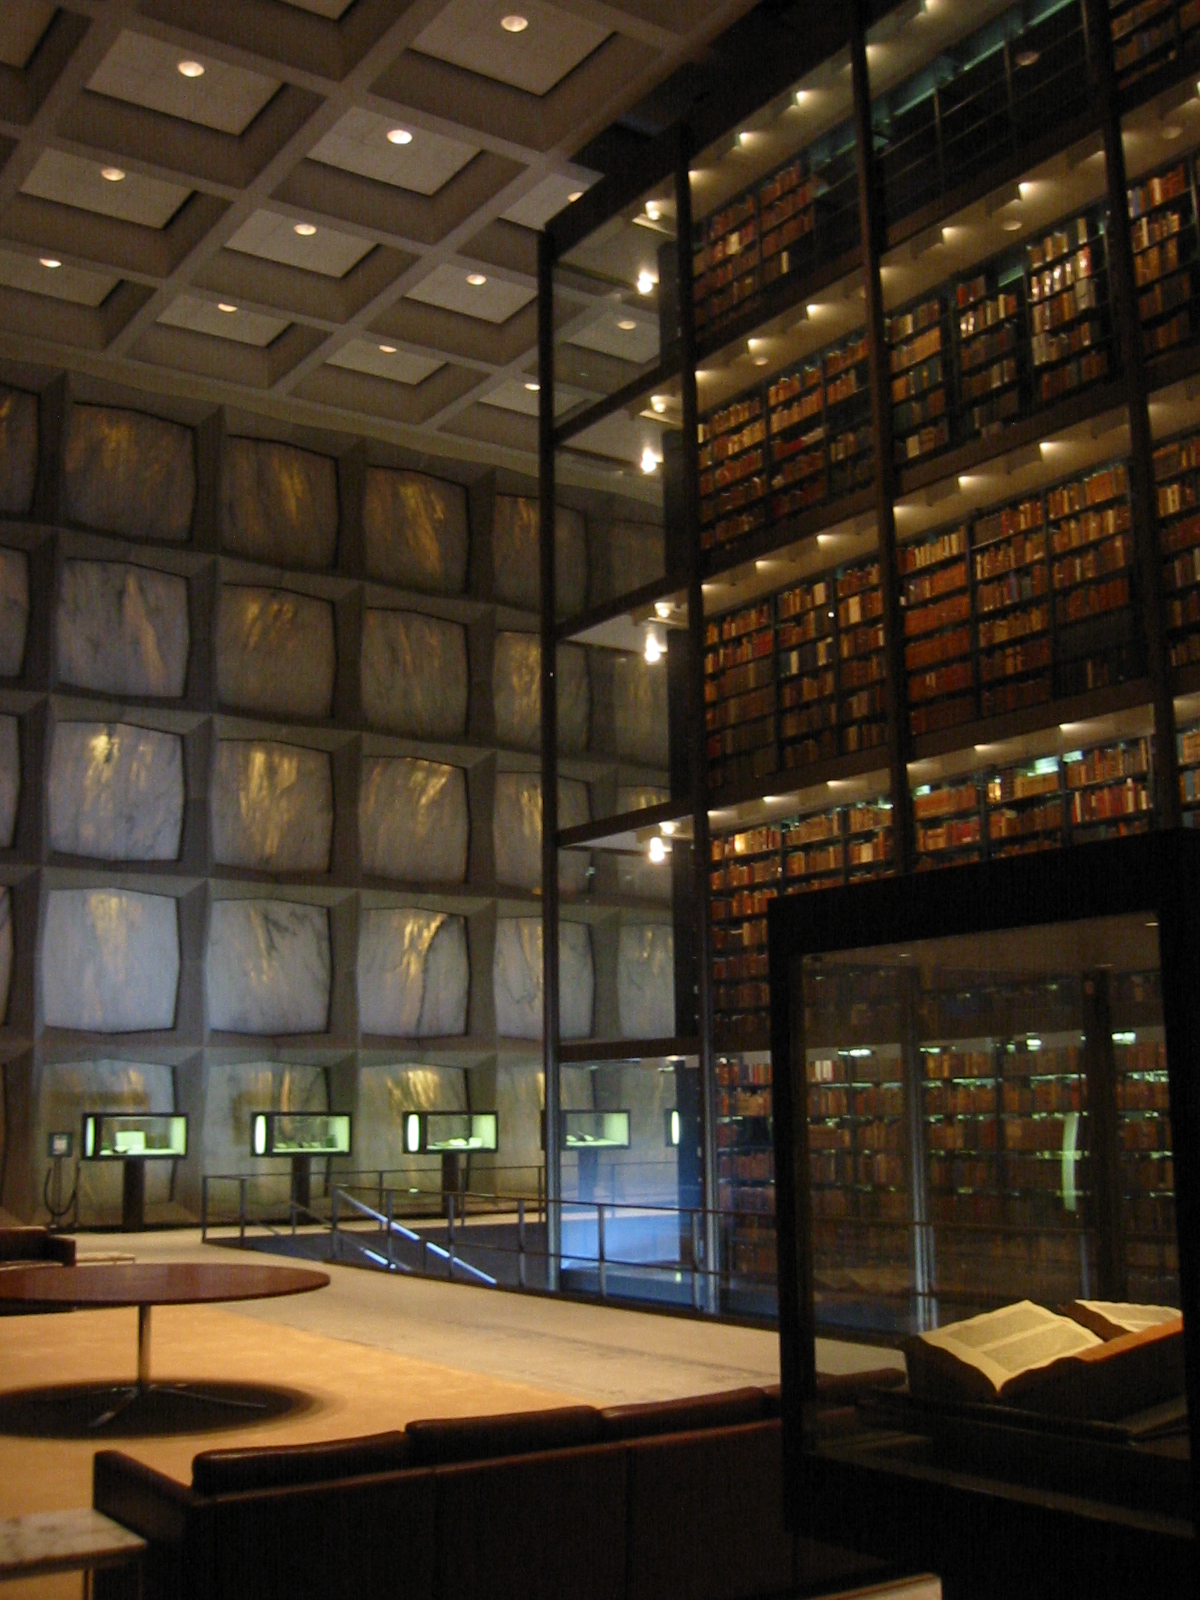 Hidden Treasures in Yale’s Vaults: Finding Rare Books